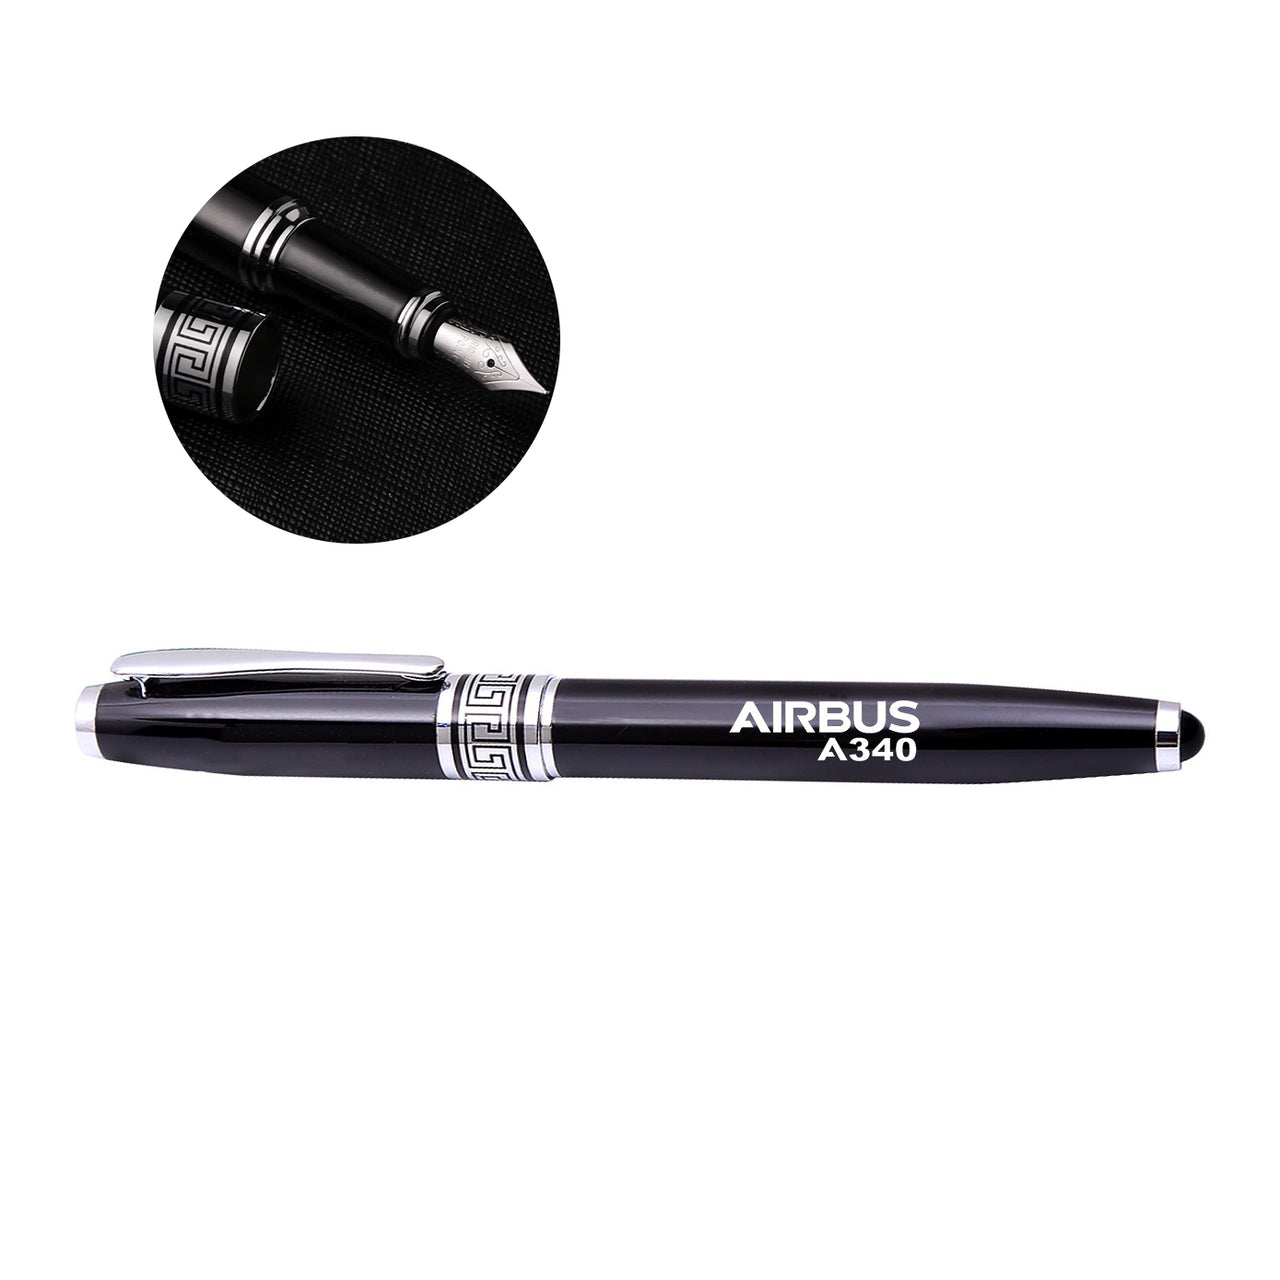 Airbus A340 & Text Designed Pens